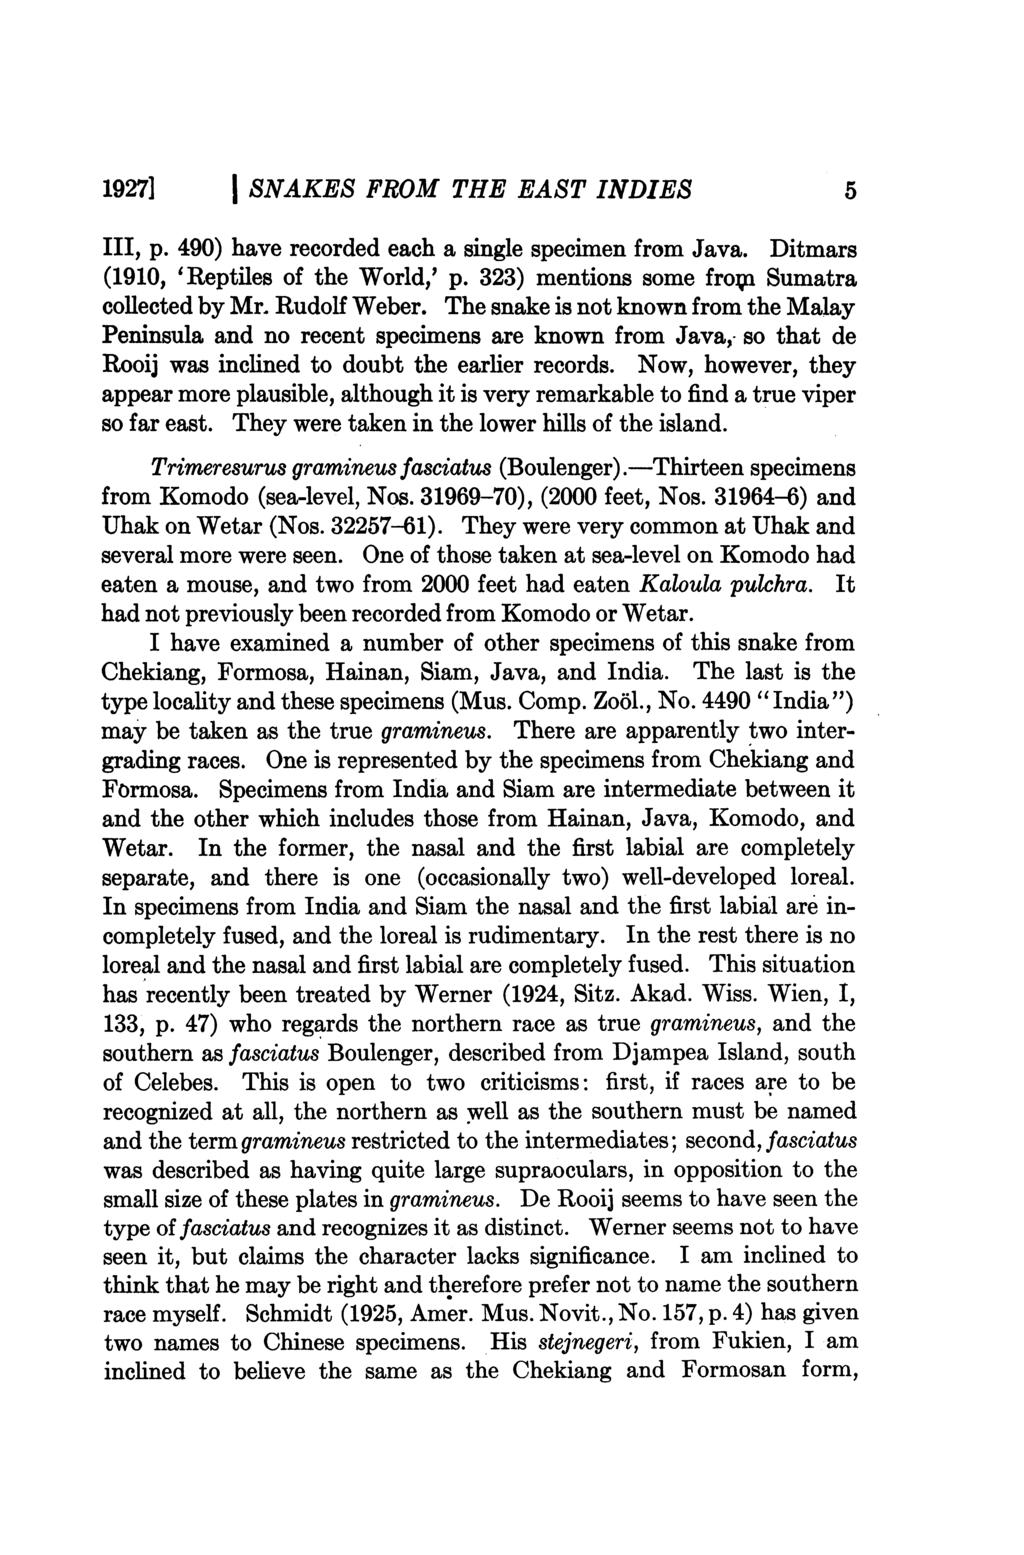 I 1927] SNAKES FROM THE EAST INDIES 5 III, p. 490) have recorded each a single specimen from Java. Ditmars (1910, 'Reptiles of the World,' p. 323) mentions some from Sumatra collected by Mr.